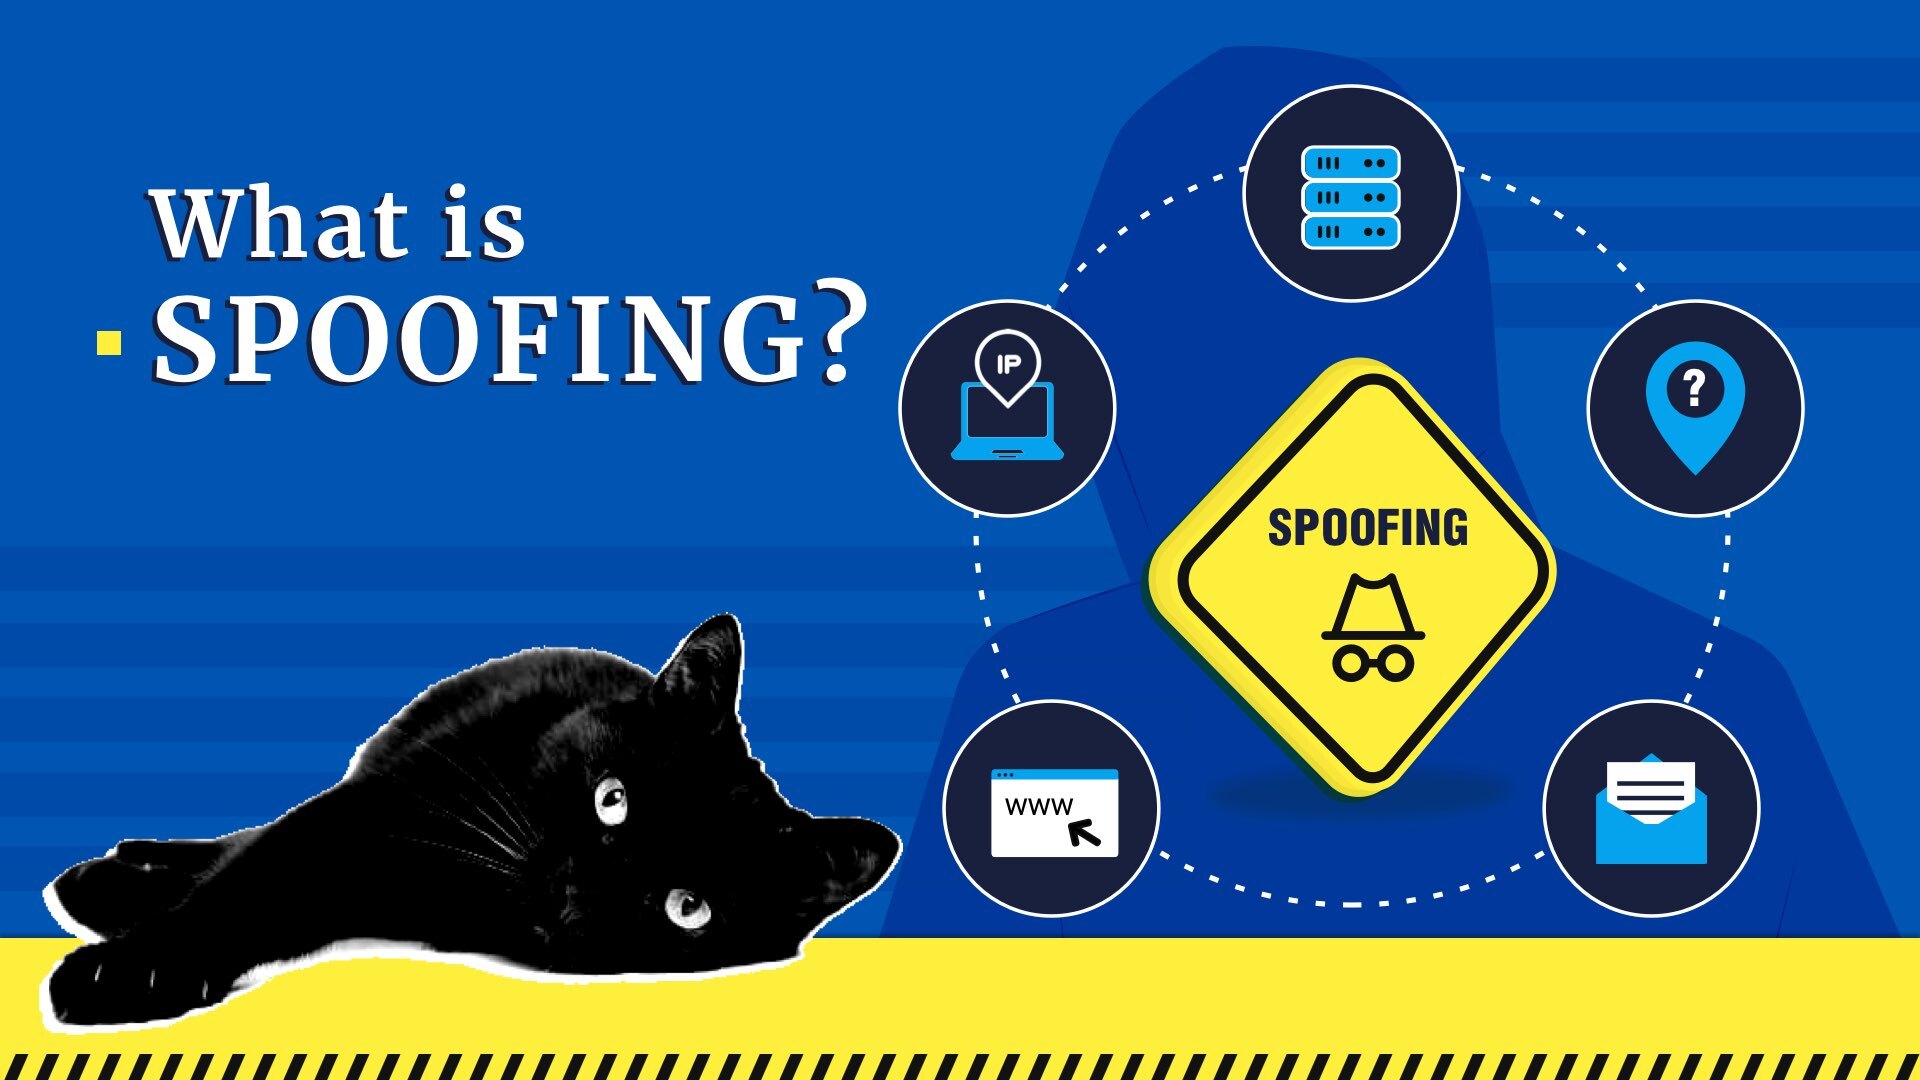 What is Spoofing and what is the difference with Phishing?